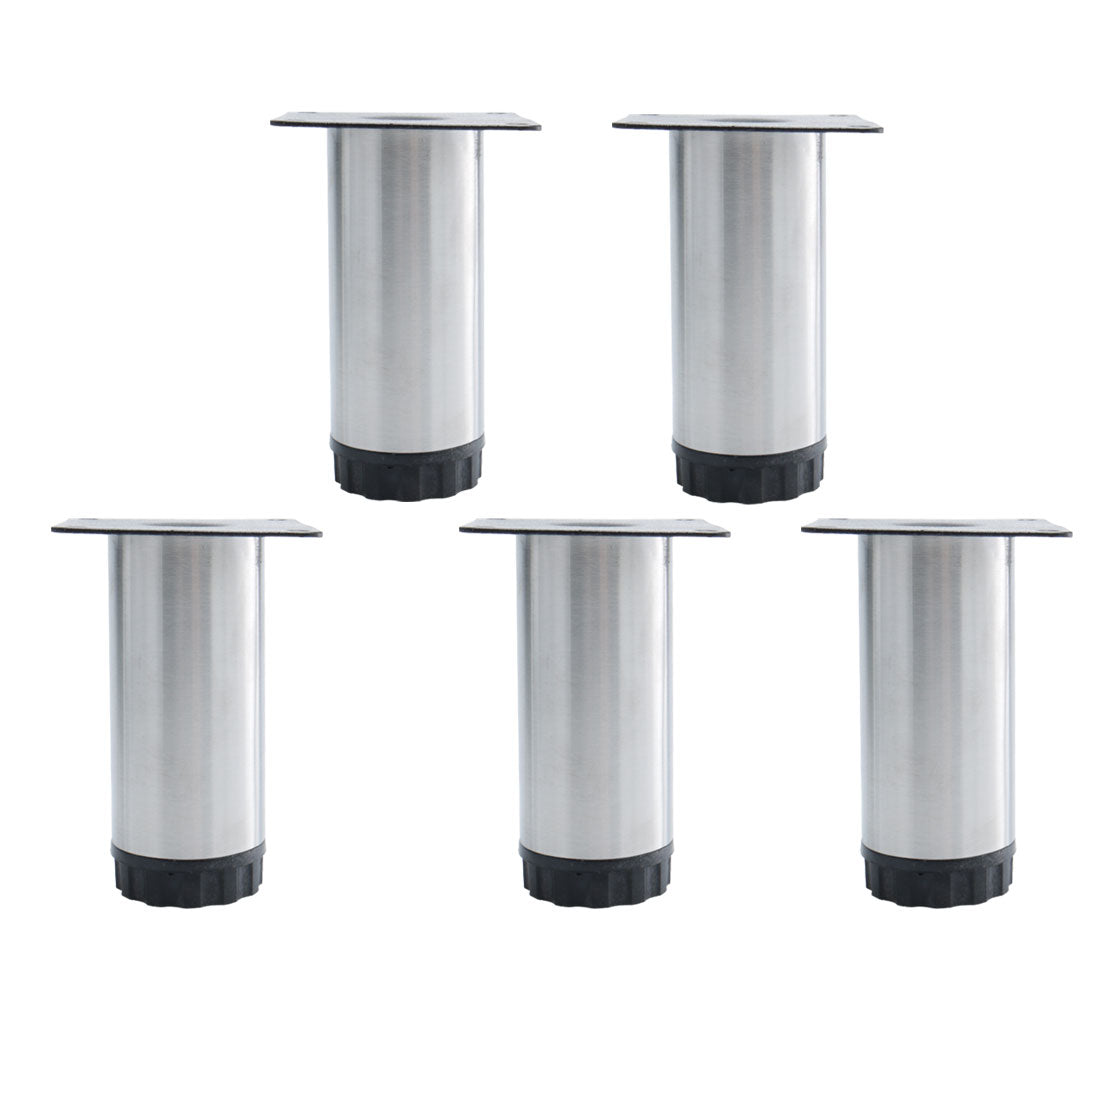 uxcell Uxcell 6" Furniture Legs Stainless Steel Sofa Table Adjustable Feet Replacement 5pcs